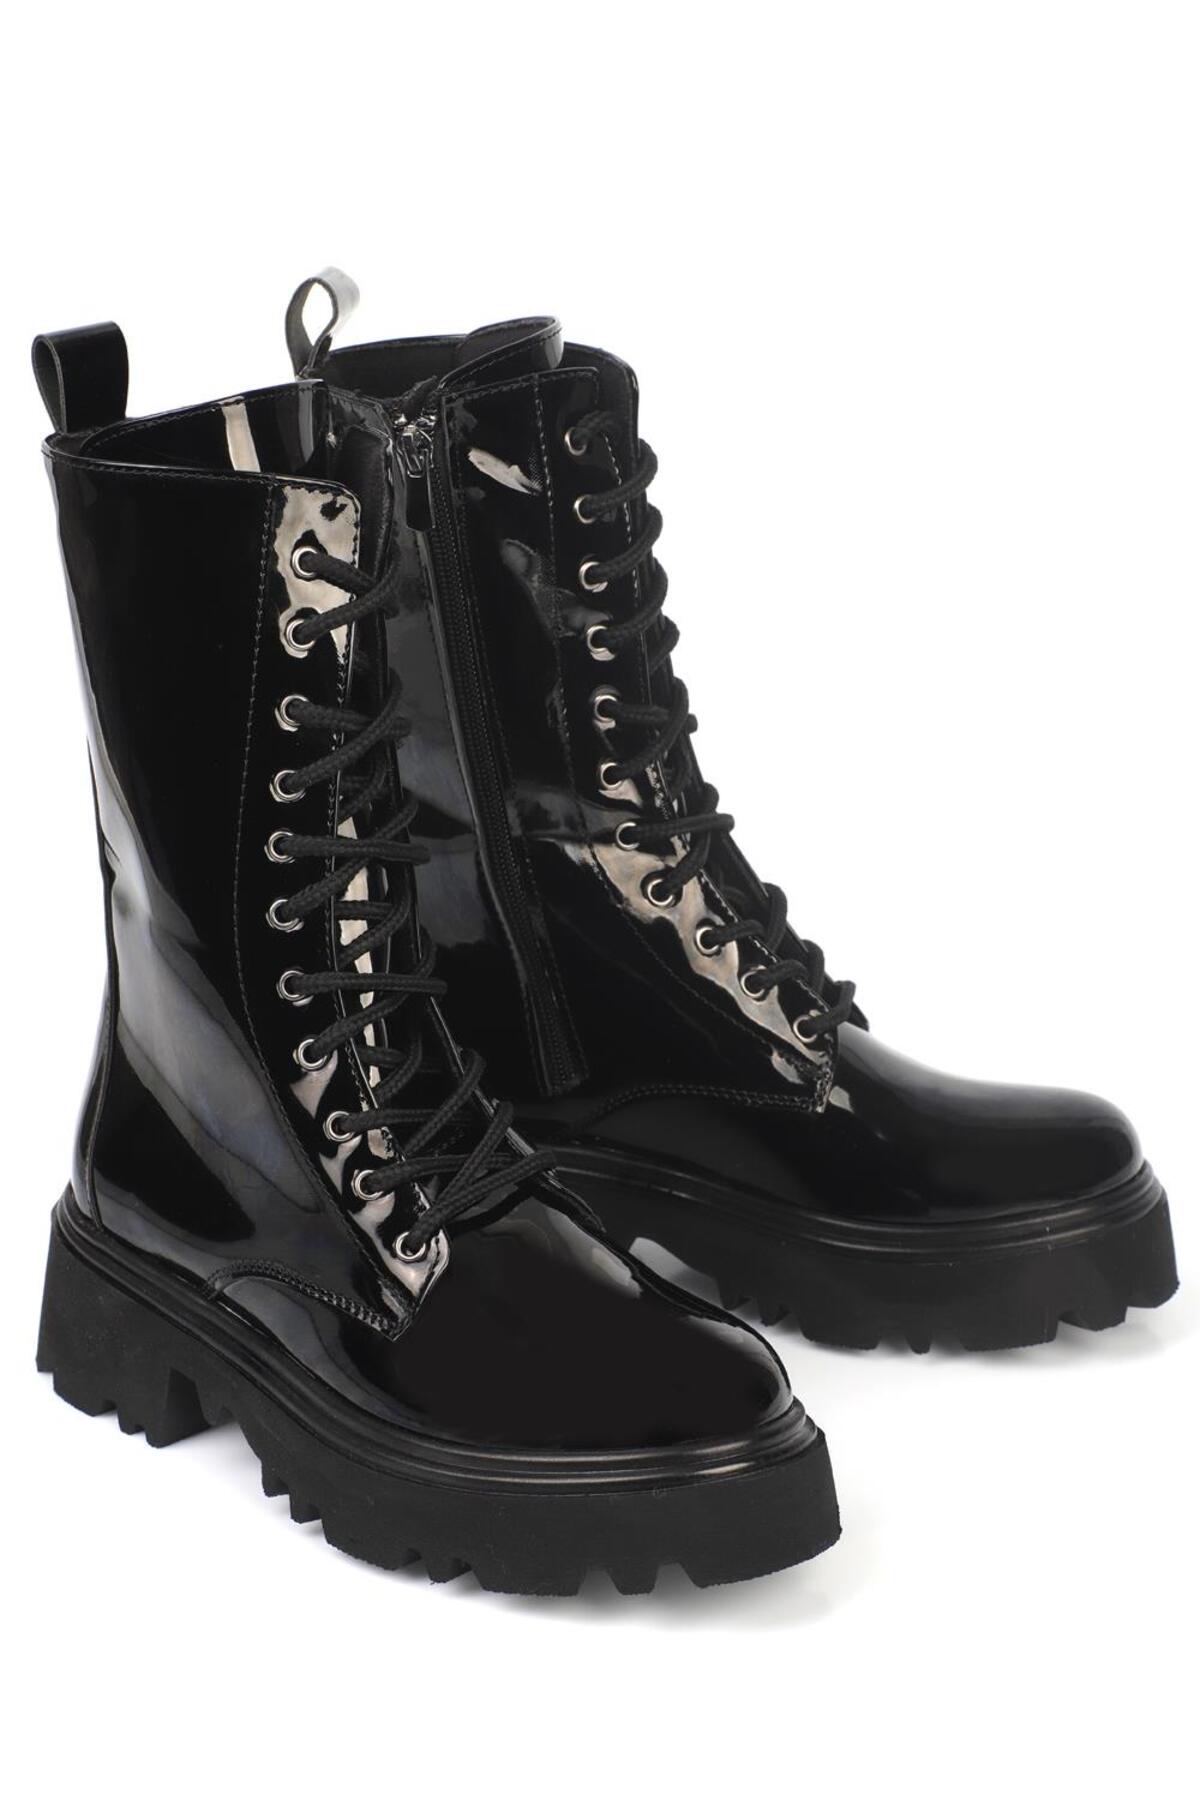 Levně Capone Outfitters Round Toe Women's Boots with Zipper and Lace-up Trak Sole.